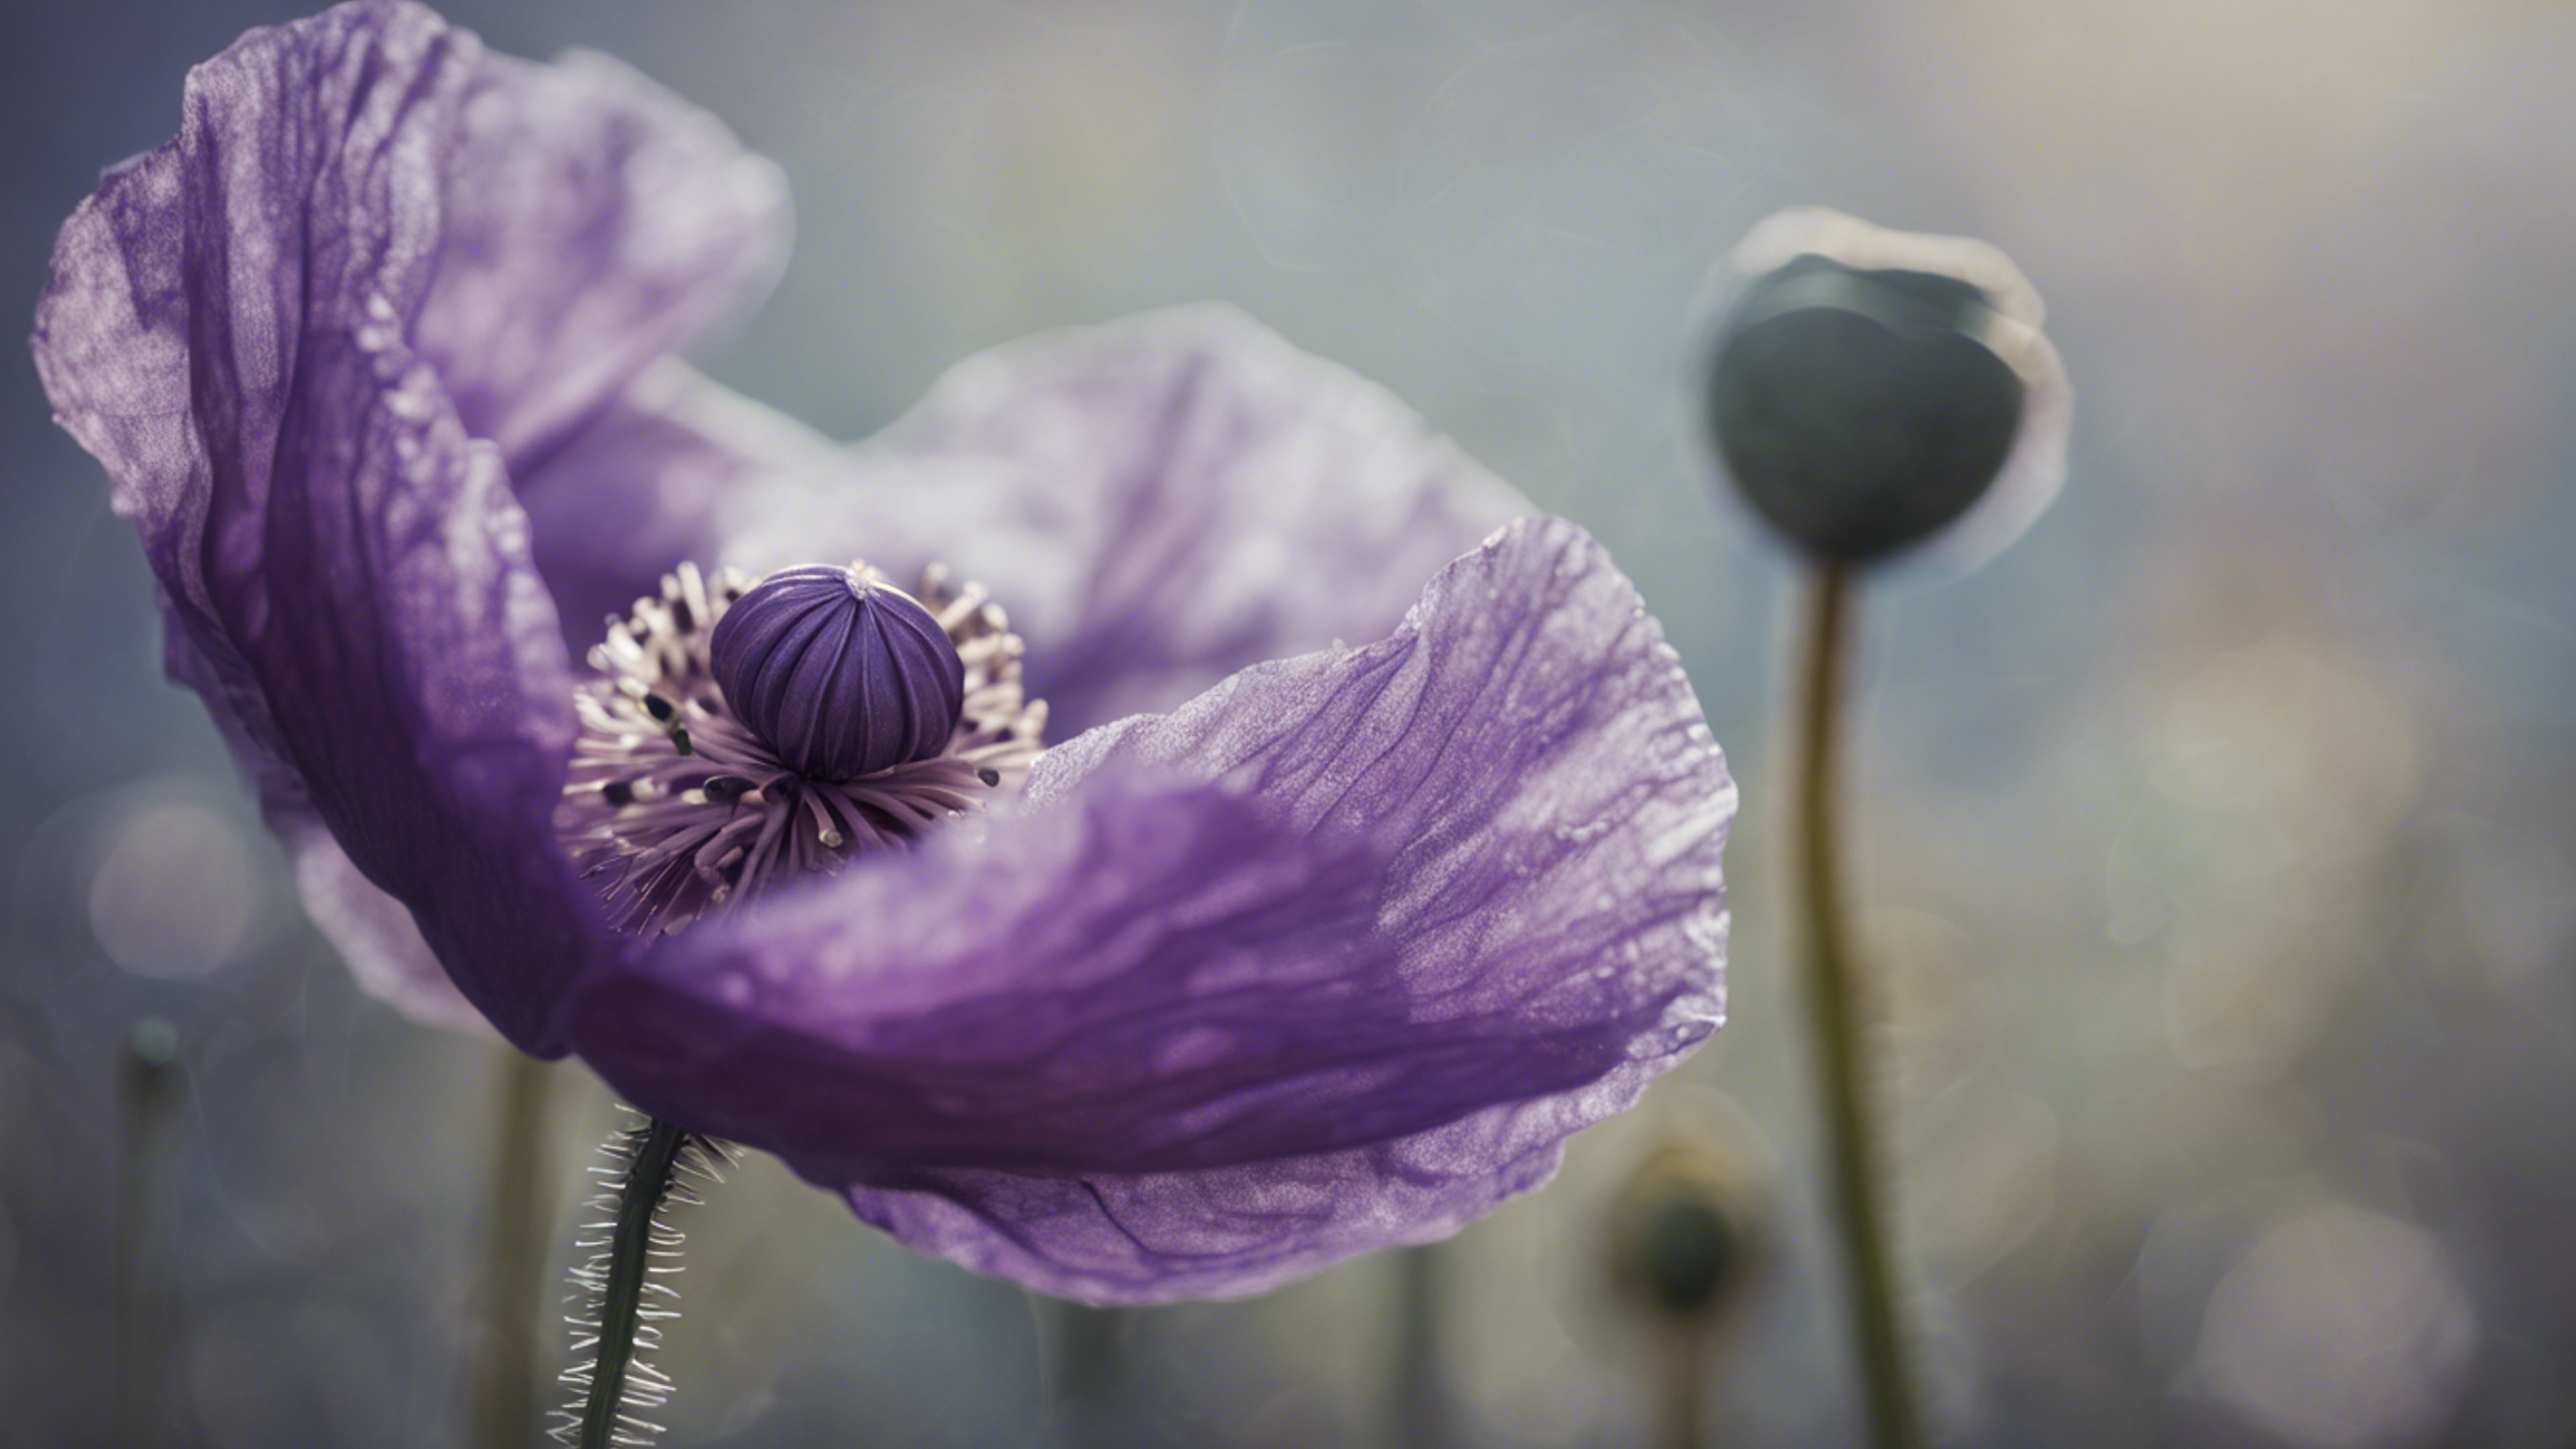 A close-up of a purple poppy with intricate details on a textured canvas. Валлпапер[f5d07fa5408f4773ae7b]